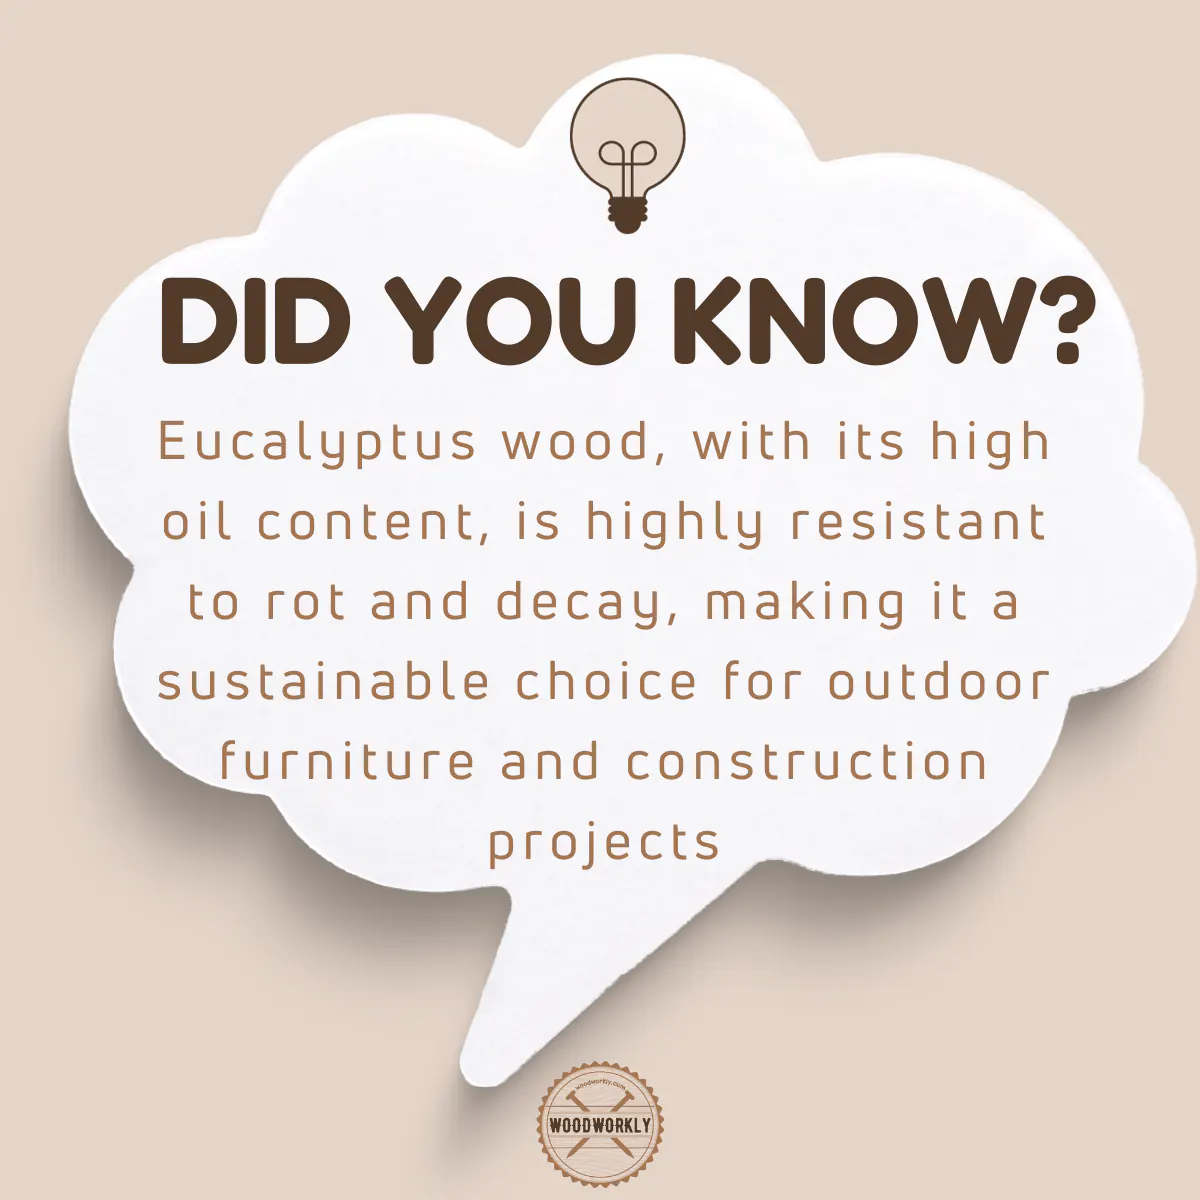 Did you know fact about eucalyptus wood